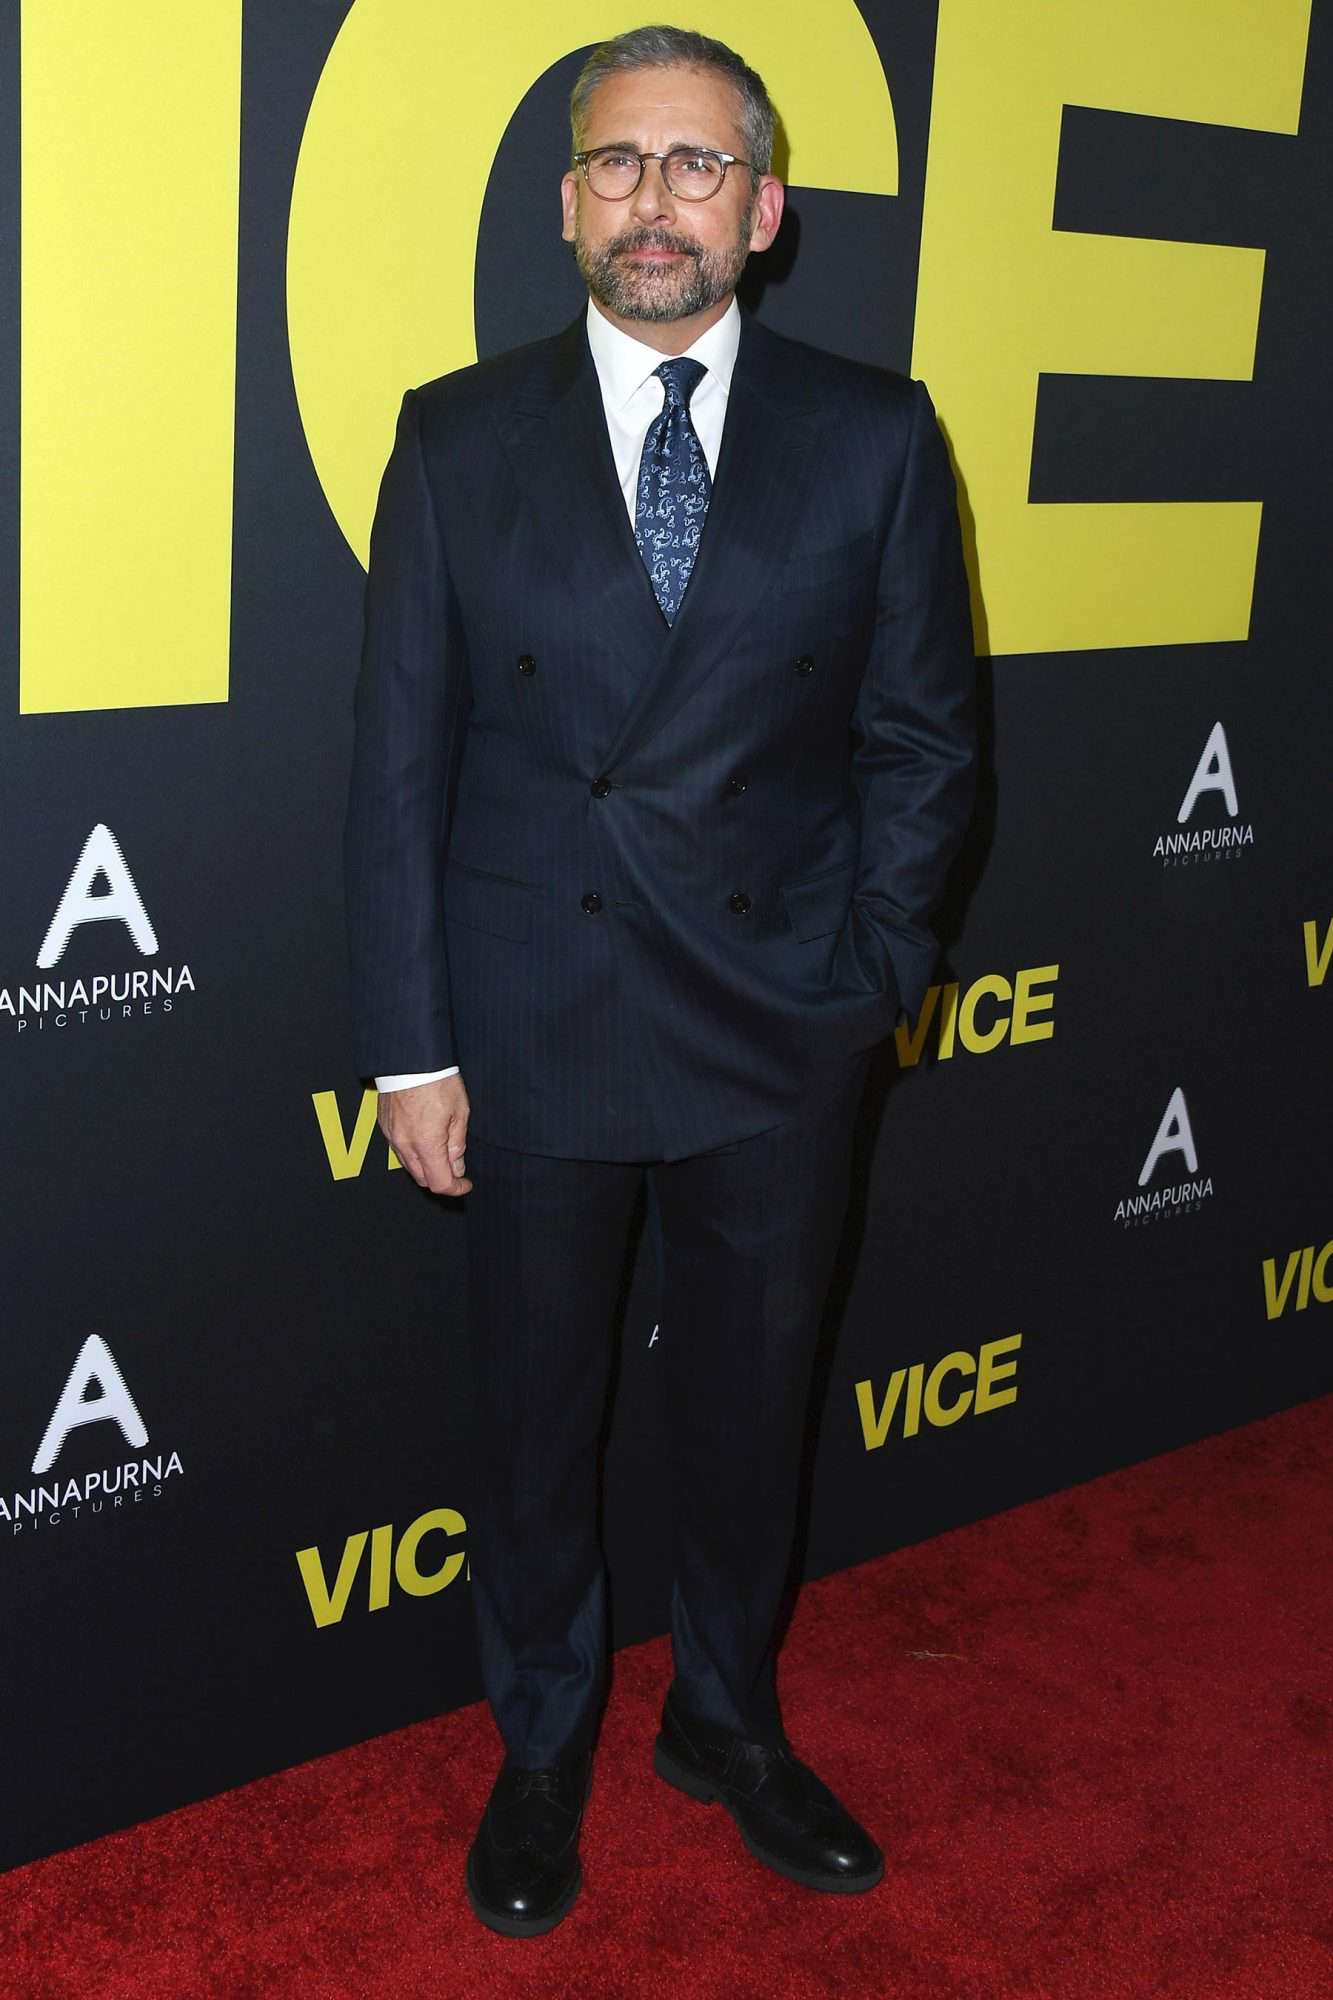 Annapurna Pictures, Gary Sanchez Productions And Plan B Entertainment's World Premiere Of "Vice" - Arrivals